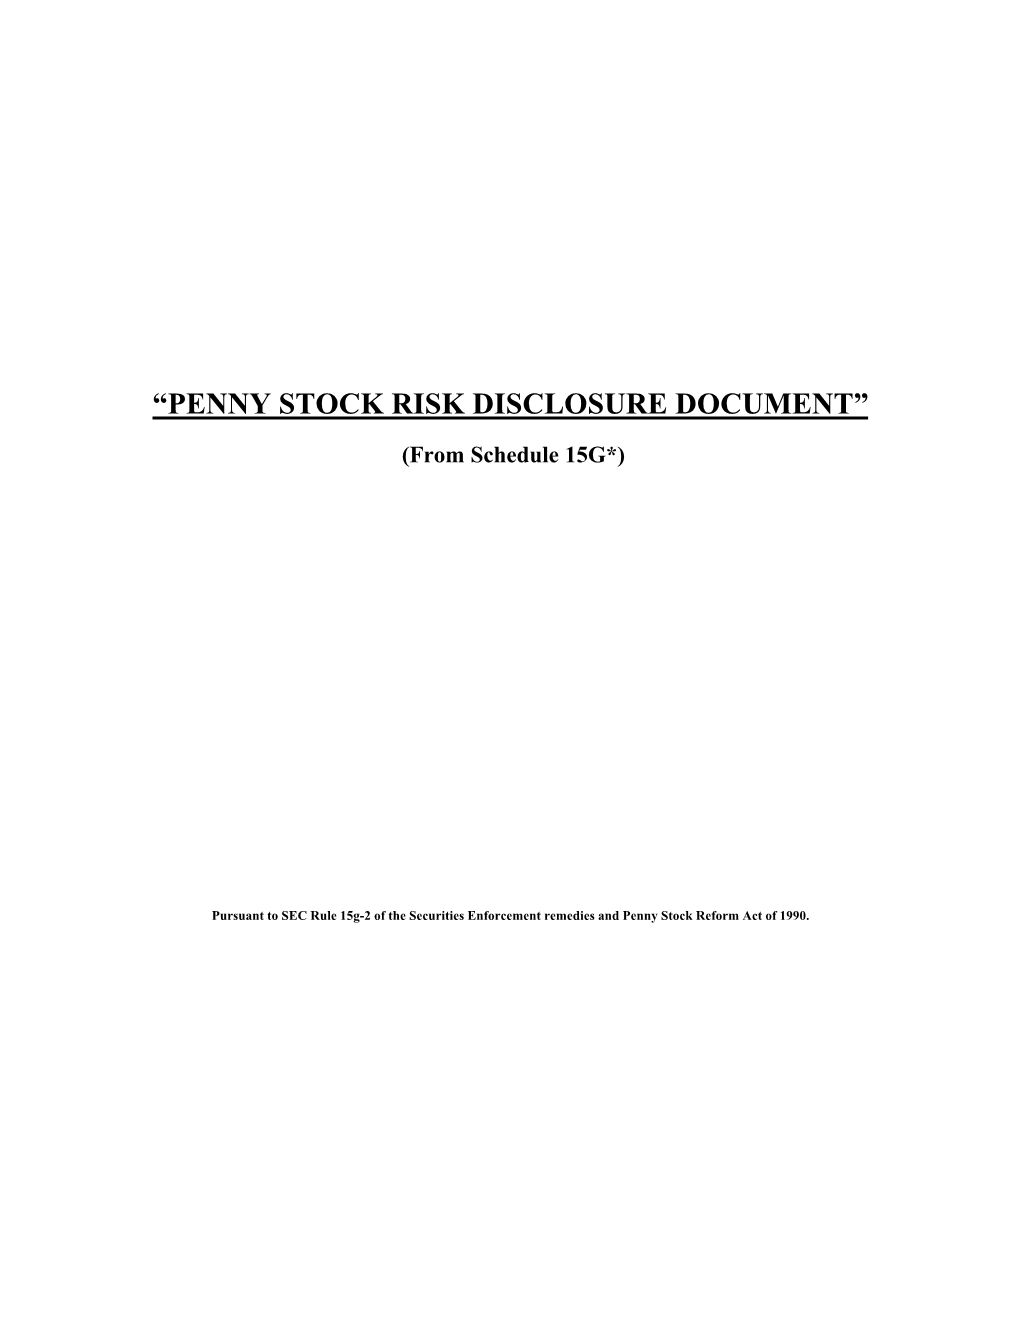 Penny Stock Risk Disclosure Document”